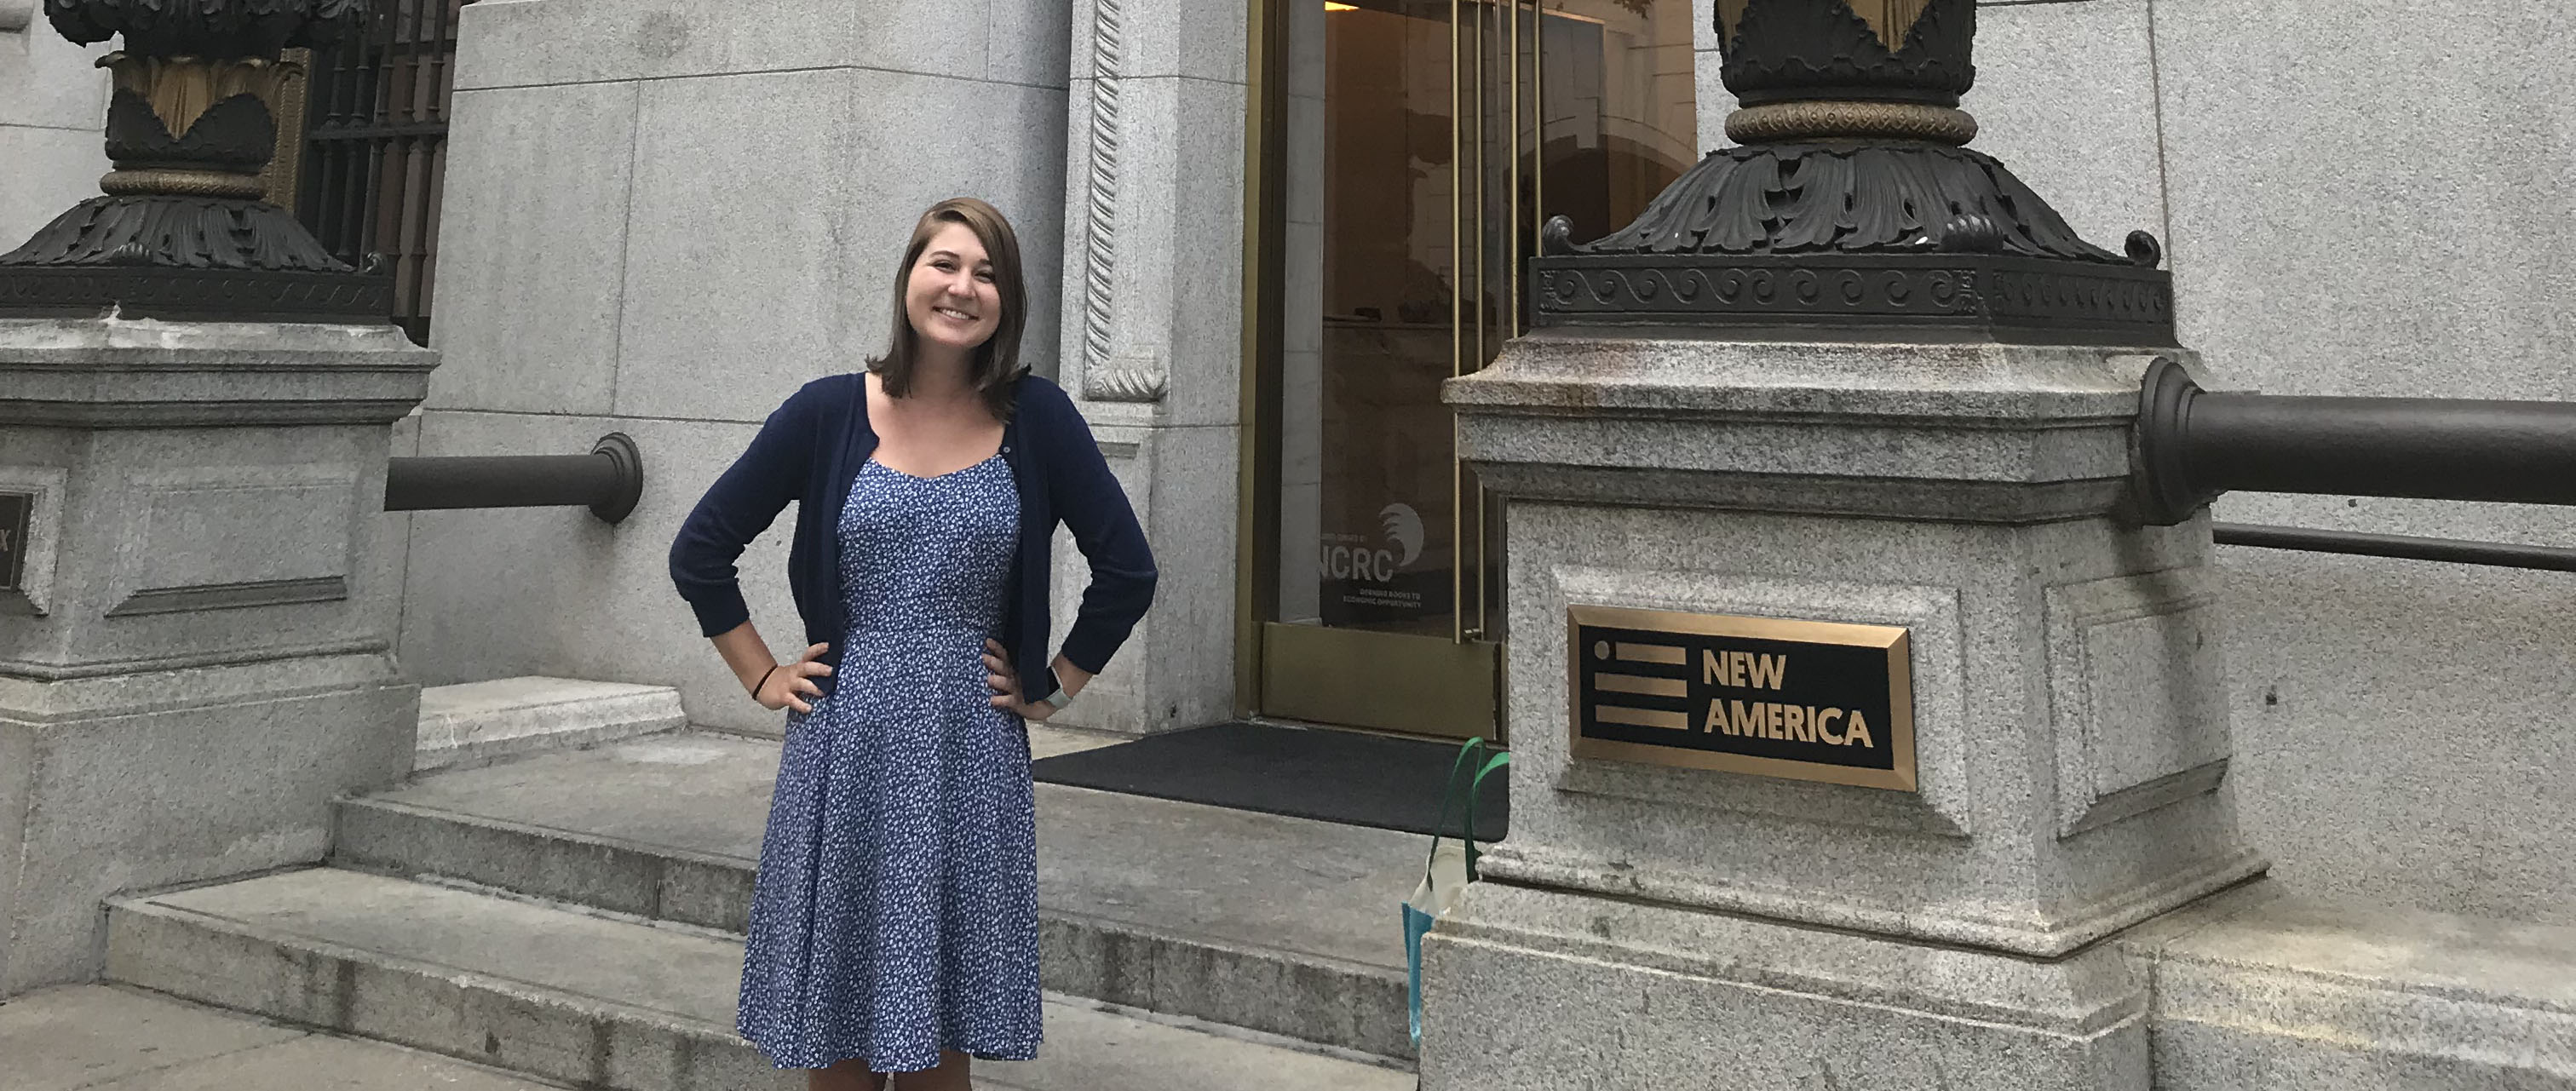 Lake, standing outside the New America's Open Technology Institute in Washington, D.C., says her career path is a moving target, but that her experiences this summer have provided her yet another option of what she might do following graduation.